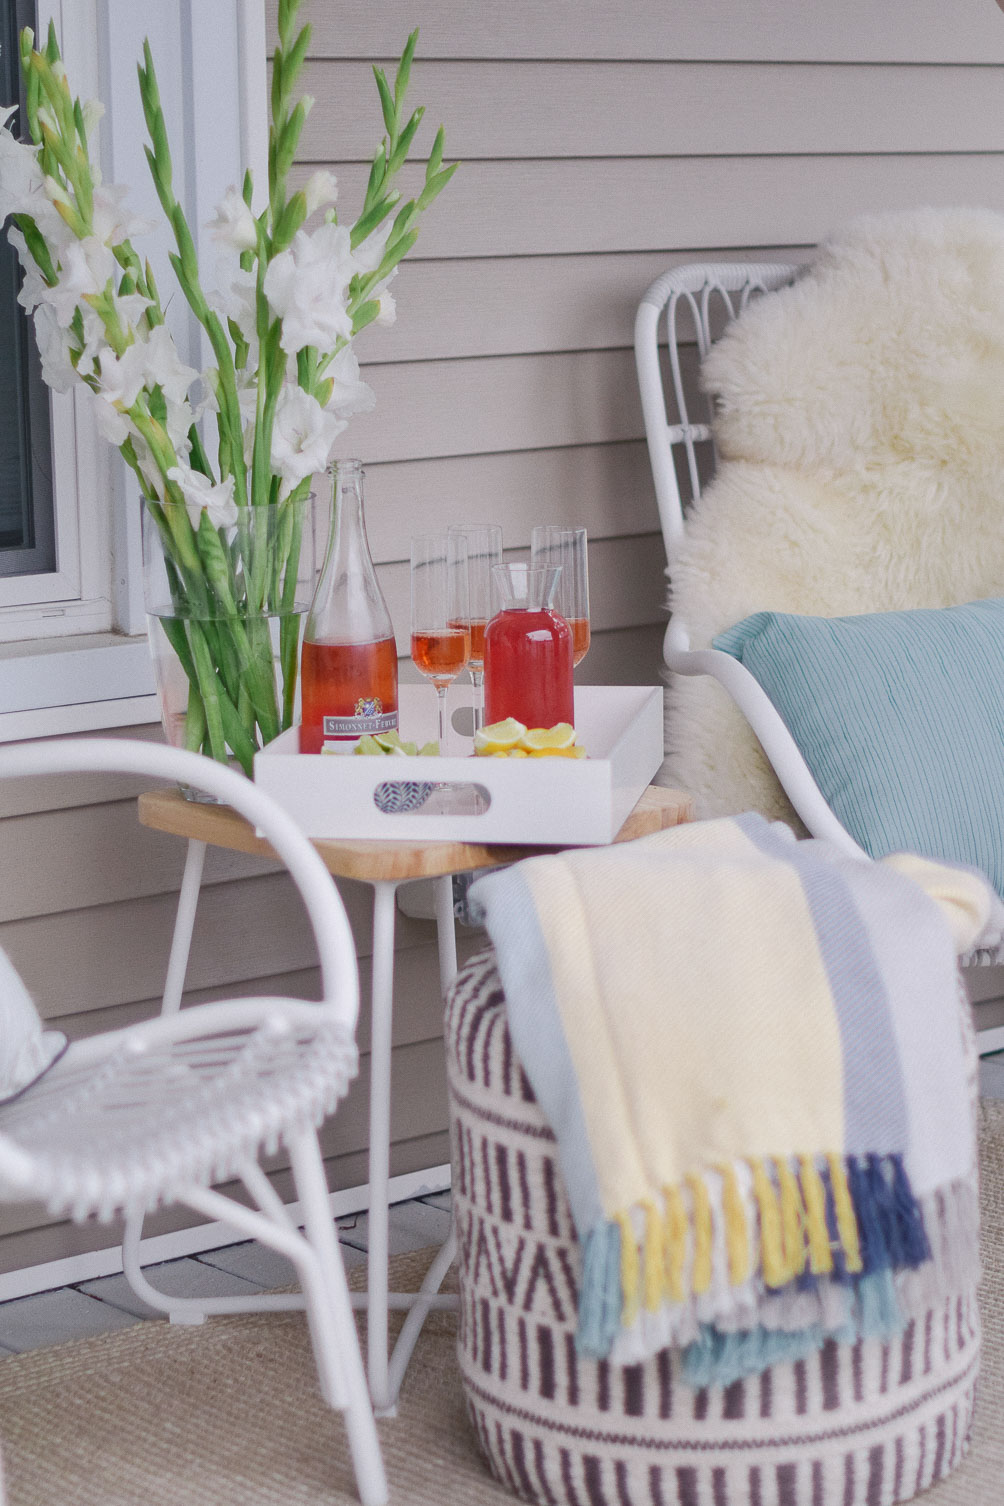 Article Hosts - small space outdoor entertaining with modern, affordable furniture and decor